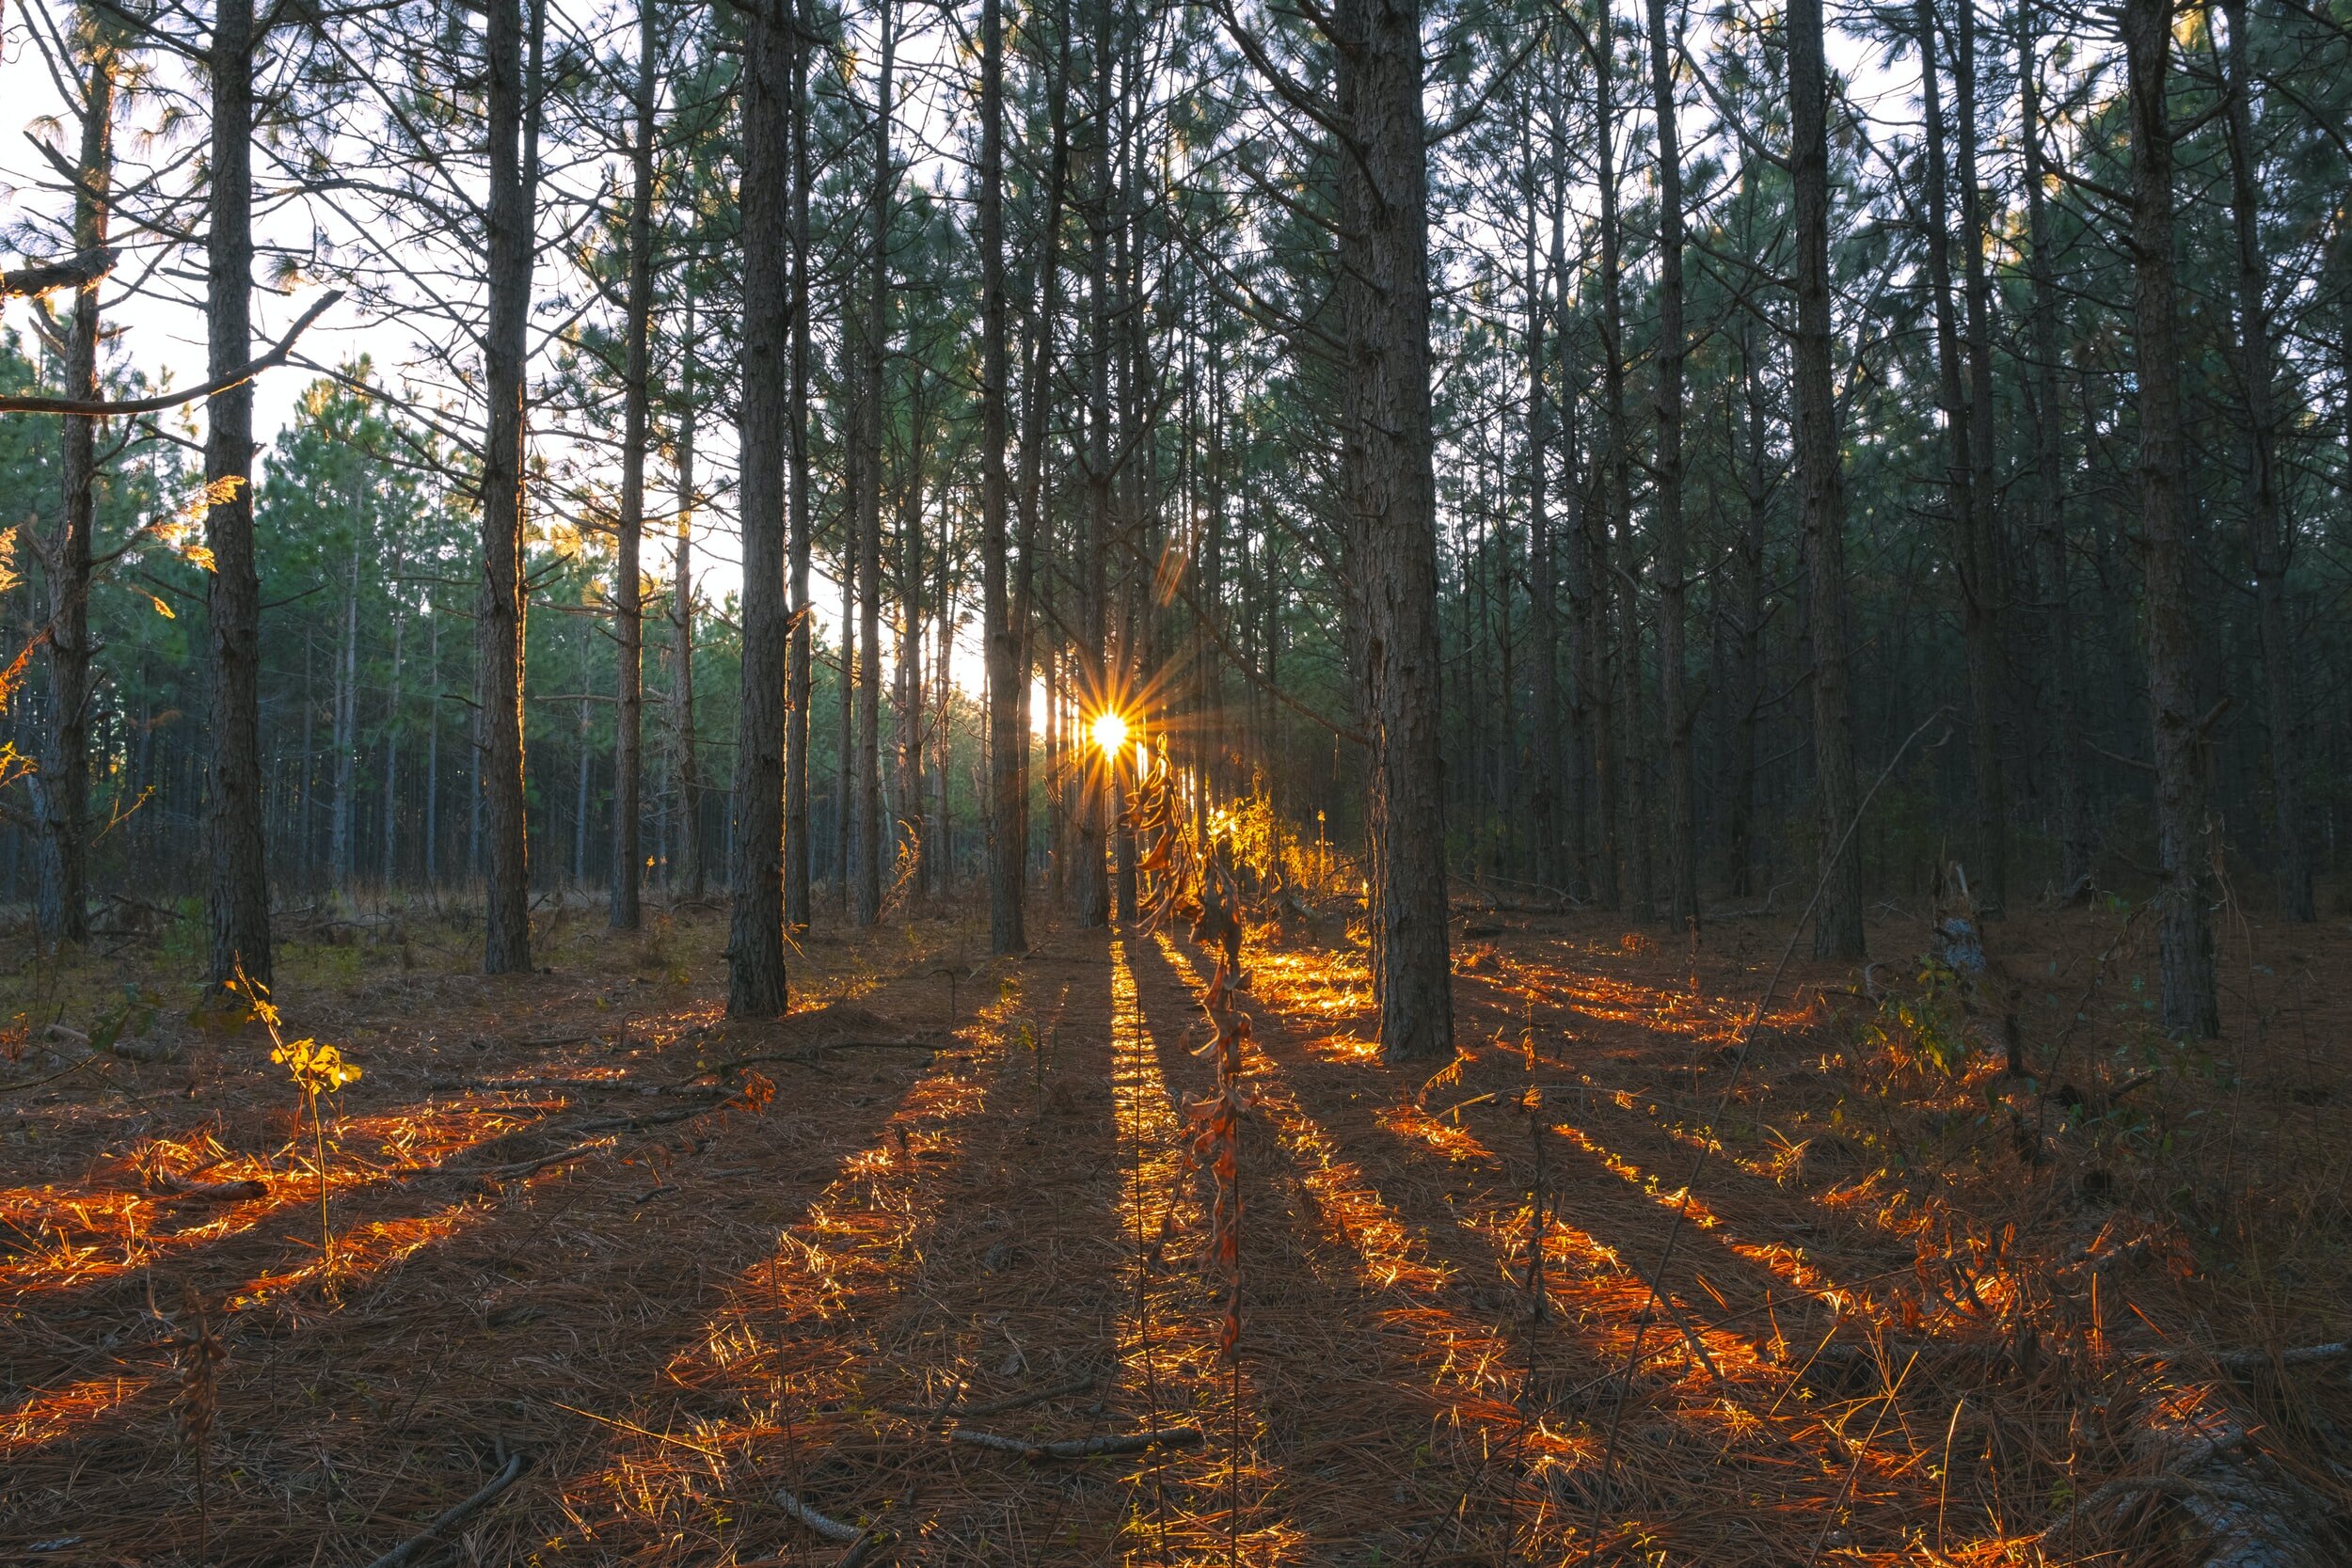 PICTURED: light shines through the “pines in lines” of a modern manually-planted pine forest.